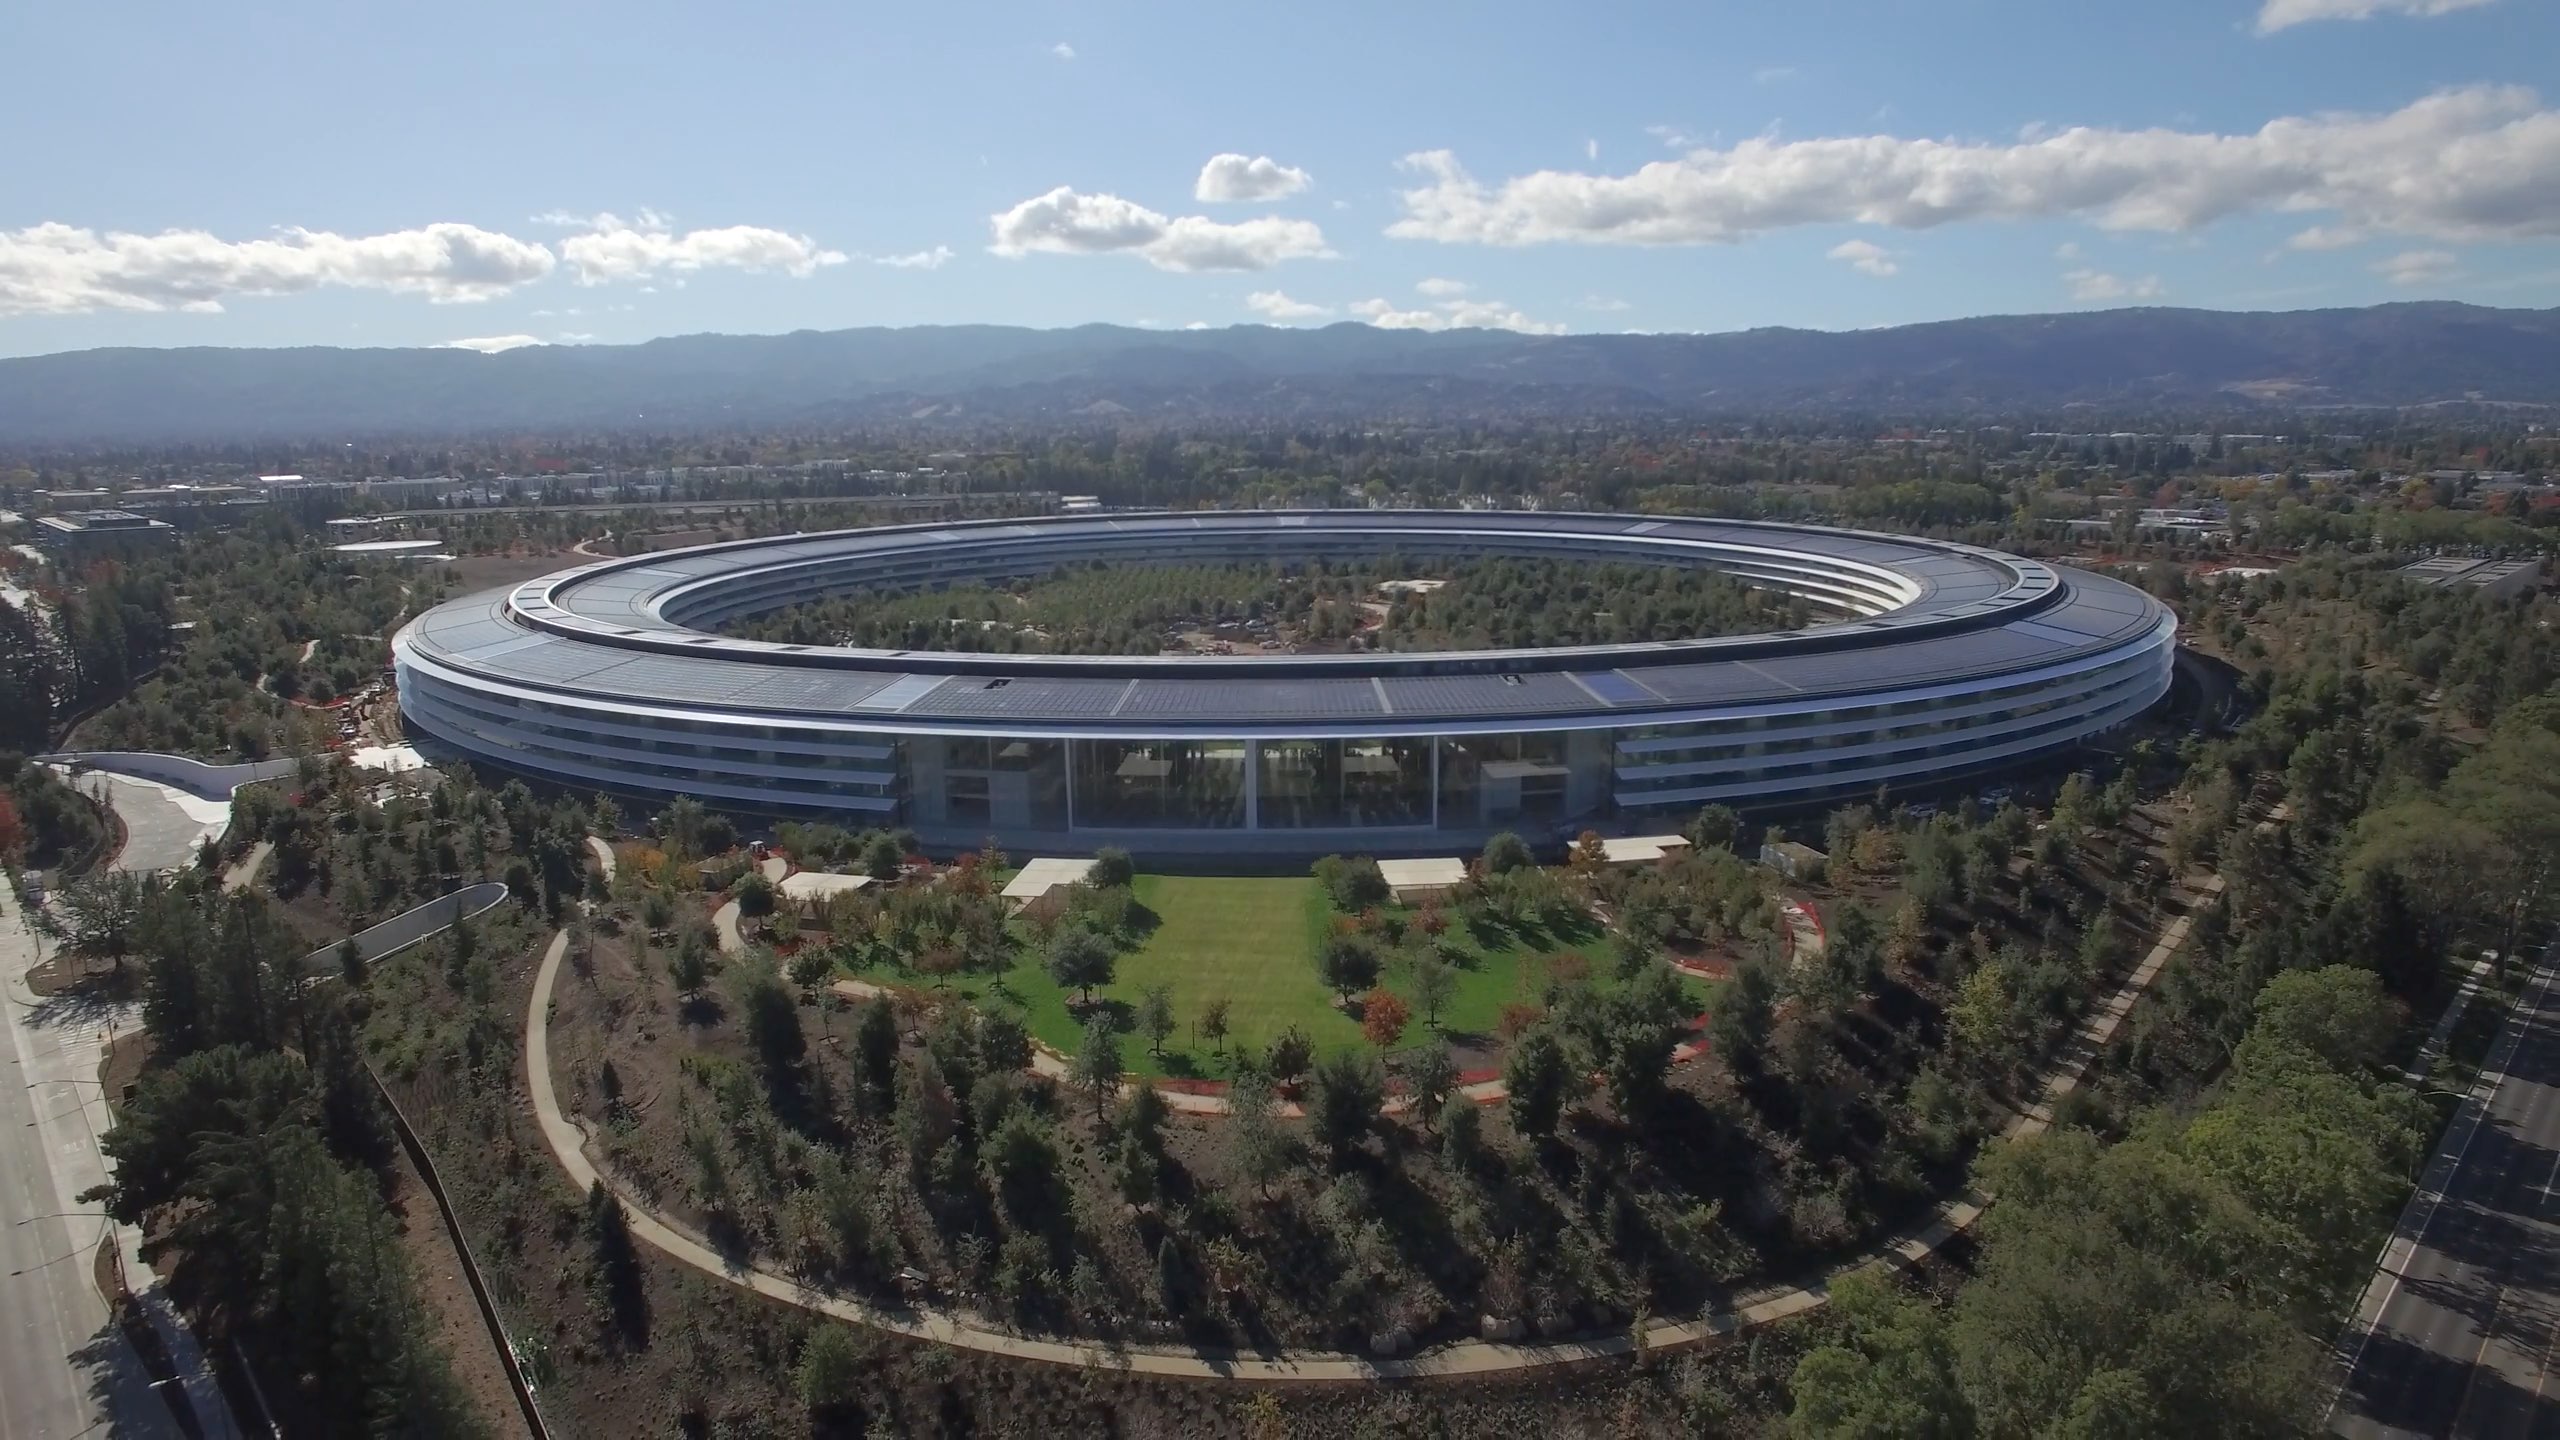 Drone footage of One Apple Park, Apple's Foster + Partners-designed headquarters in Cupertino, California.